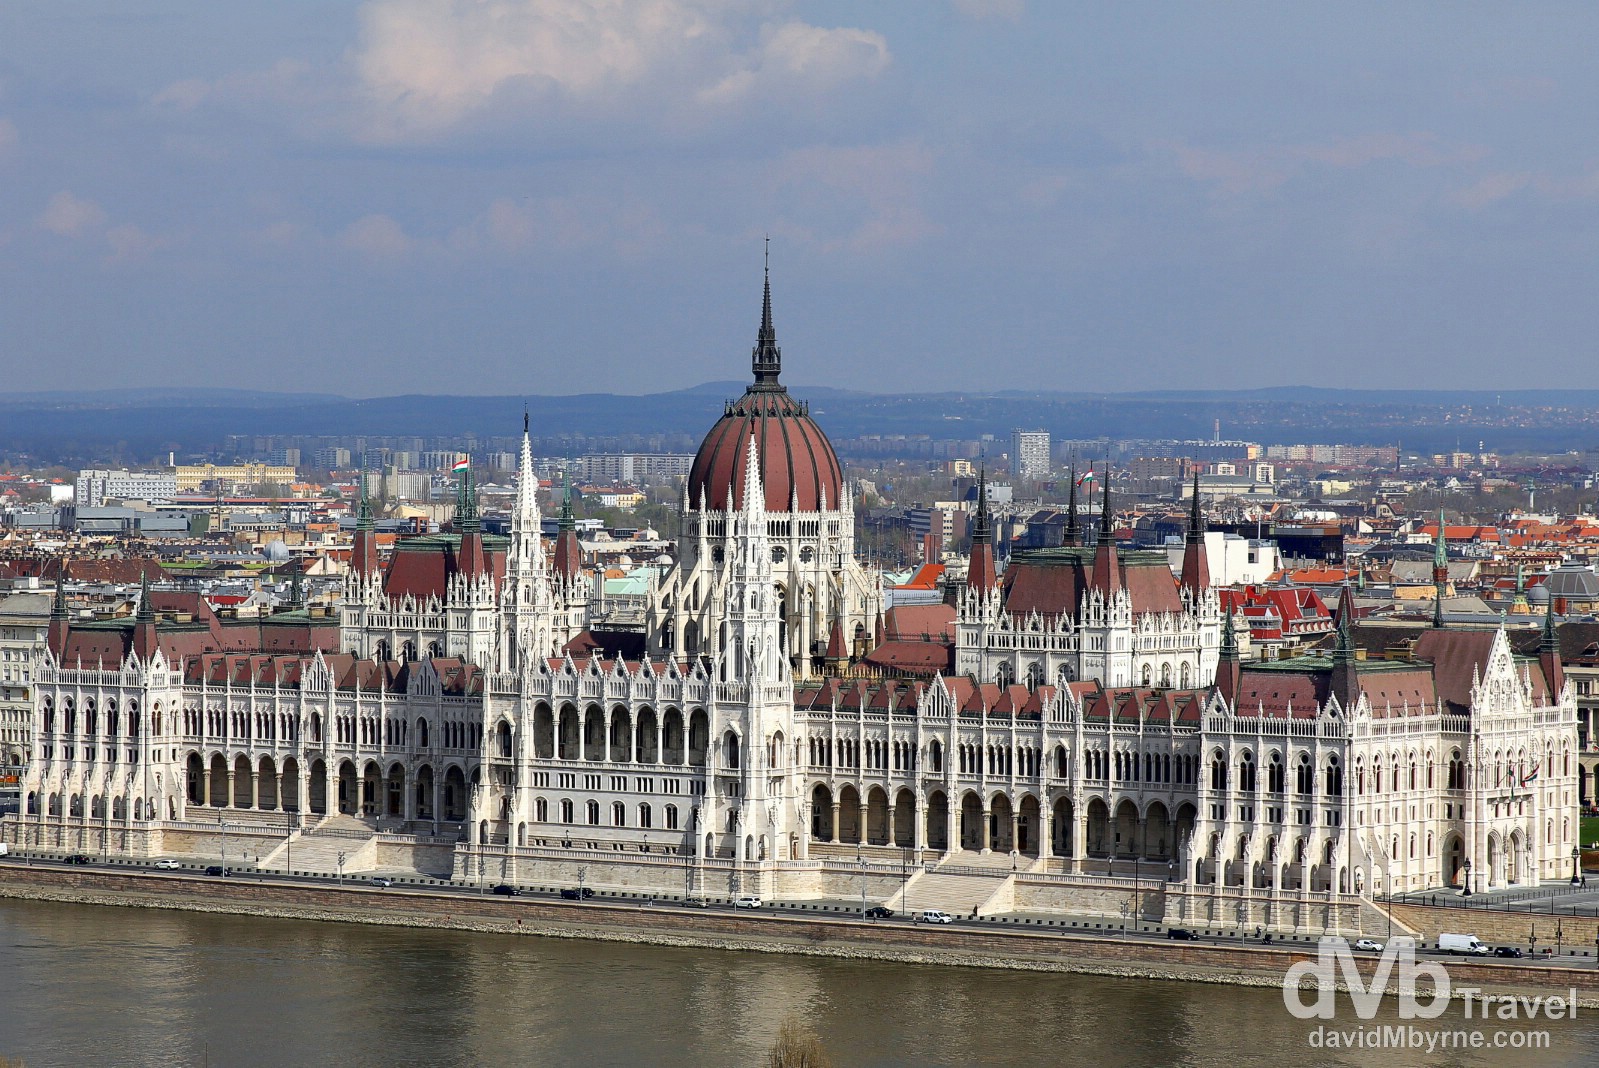 Parliament Building, one of Europe's most fabulous buildings, on the Pest bank of the Danube River as seen from Fishermans Bastion on the hills of Buda. Budapest, Hungary. March 26th, 2014.